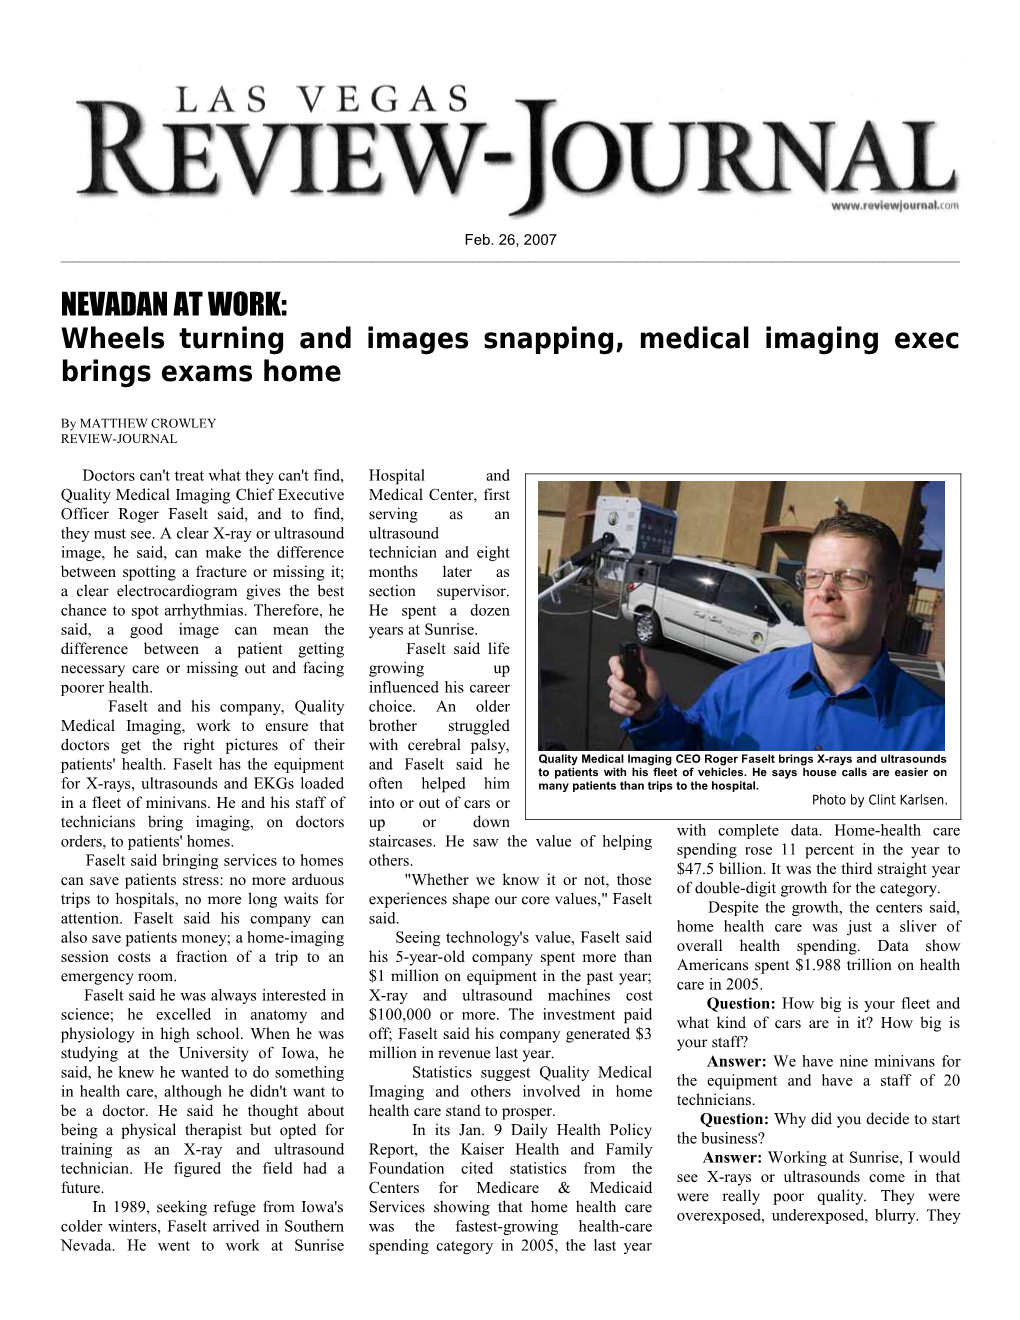 Wheels Turning and Images Snapping, Medical Imaging Exec Brings Exams Home